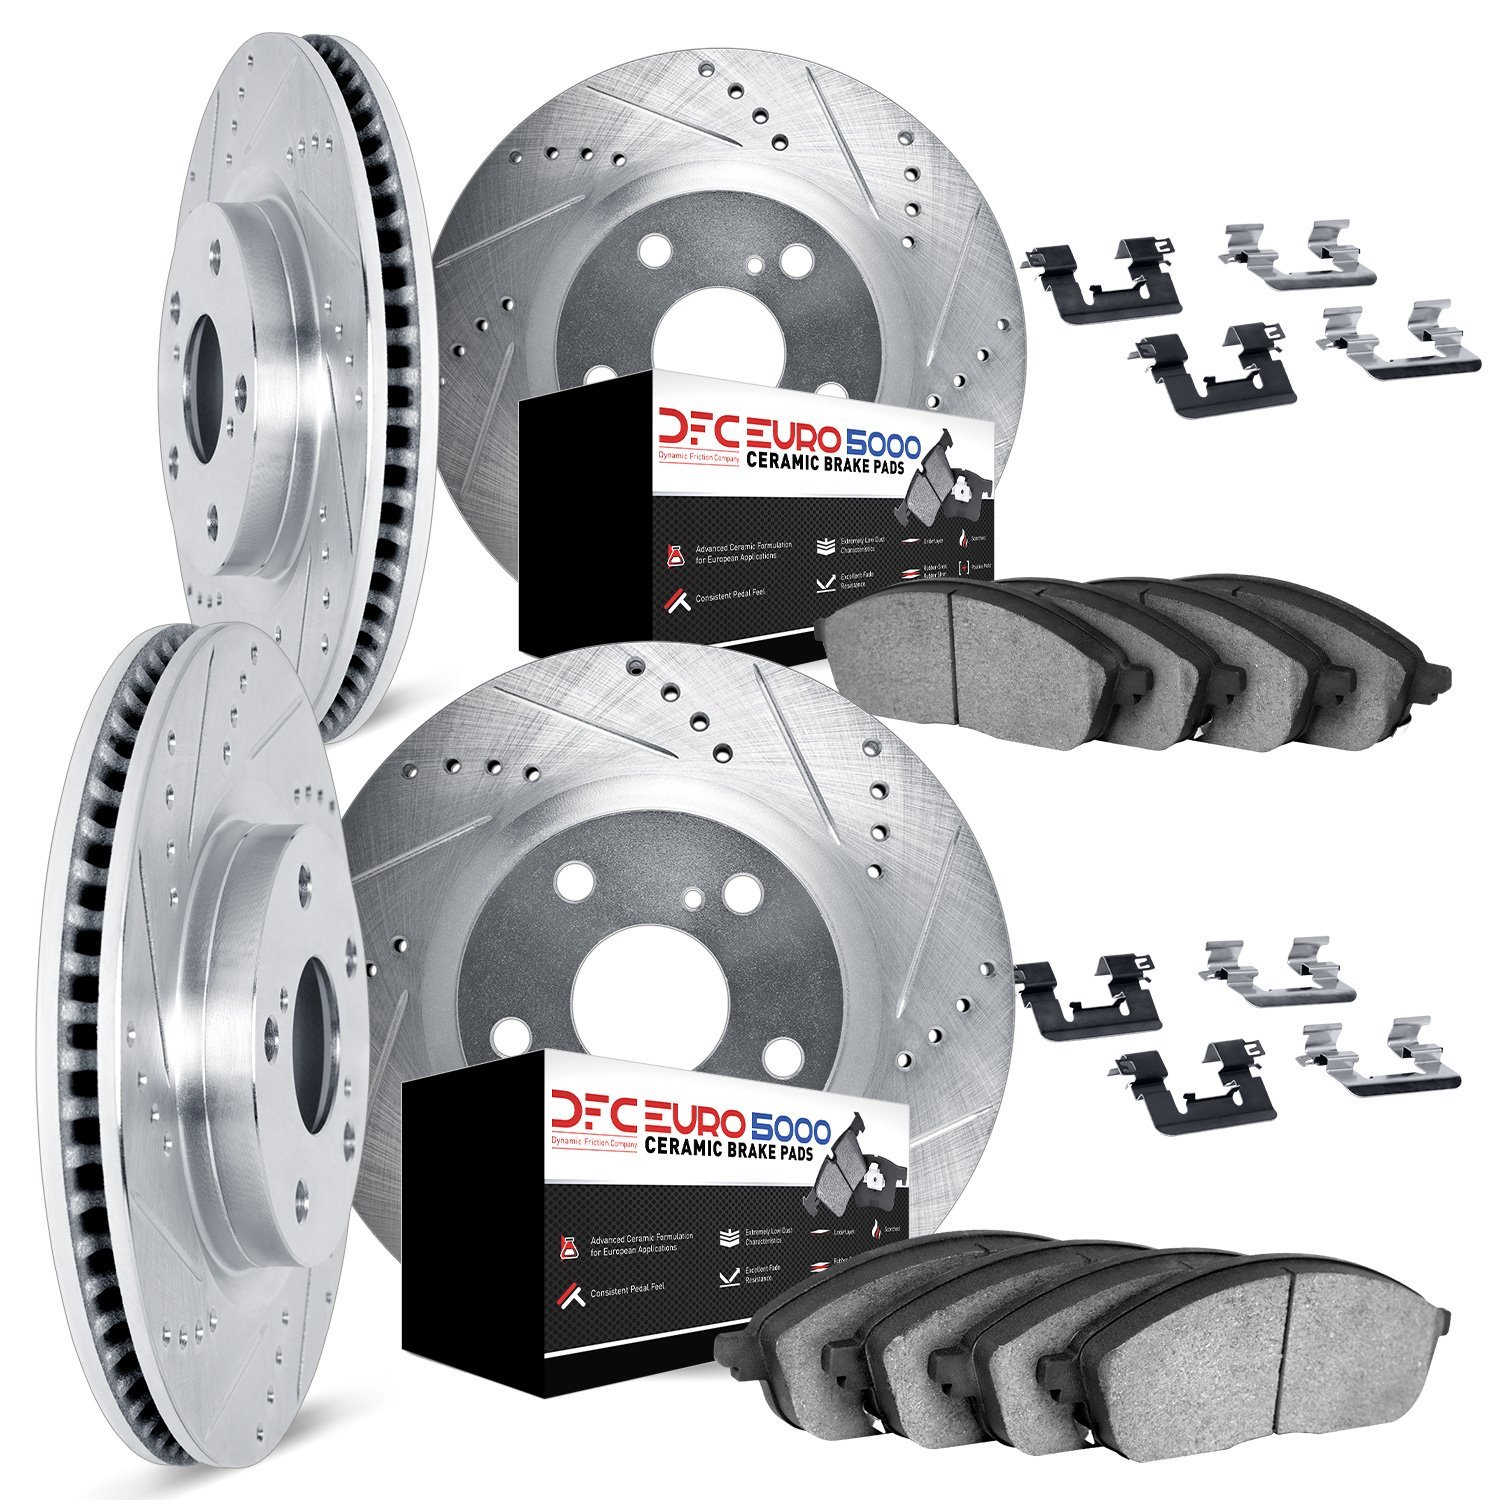 7614-31011 Drilled/Slotted Brake Rotors w/5000 Euro Ceramic Brake Pads Kit & Hardware [Silver], 2000-2000 BMW, Position: Front a